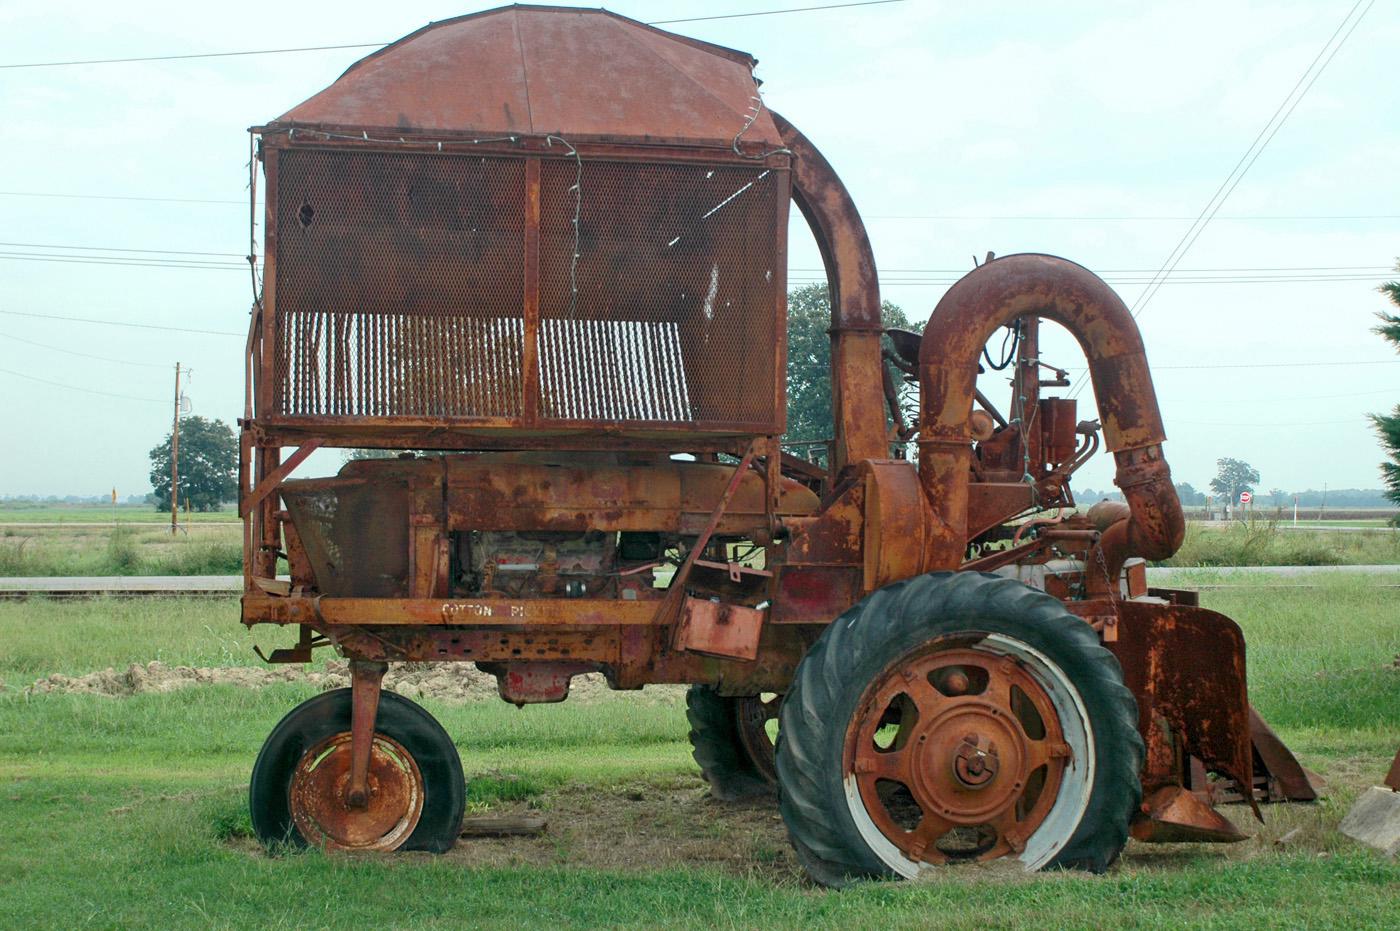 The M12H harvester at the Hobson Plantation was produced in the late 1940s. It was among the second generation of commercially successful cotton pickers to hit the market. Hopson Plantation was the site of field tests for mechanical pickers from the 1920s through the 1940s. (Photo by Bob Ratliff)